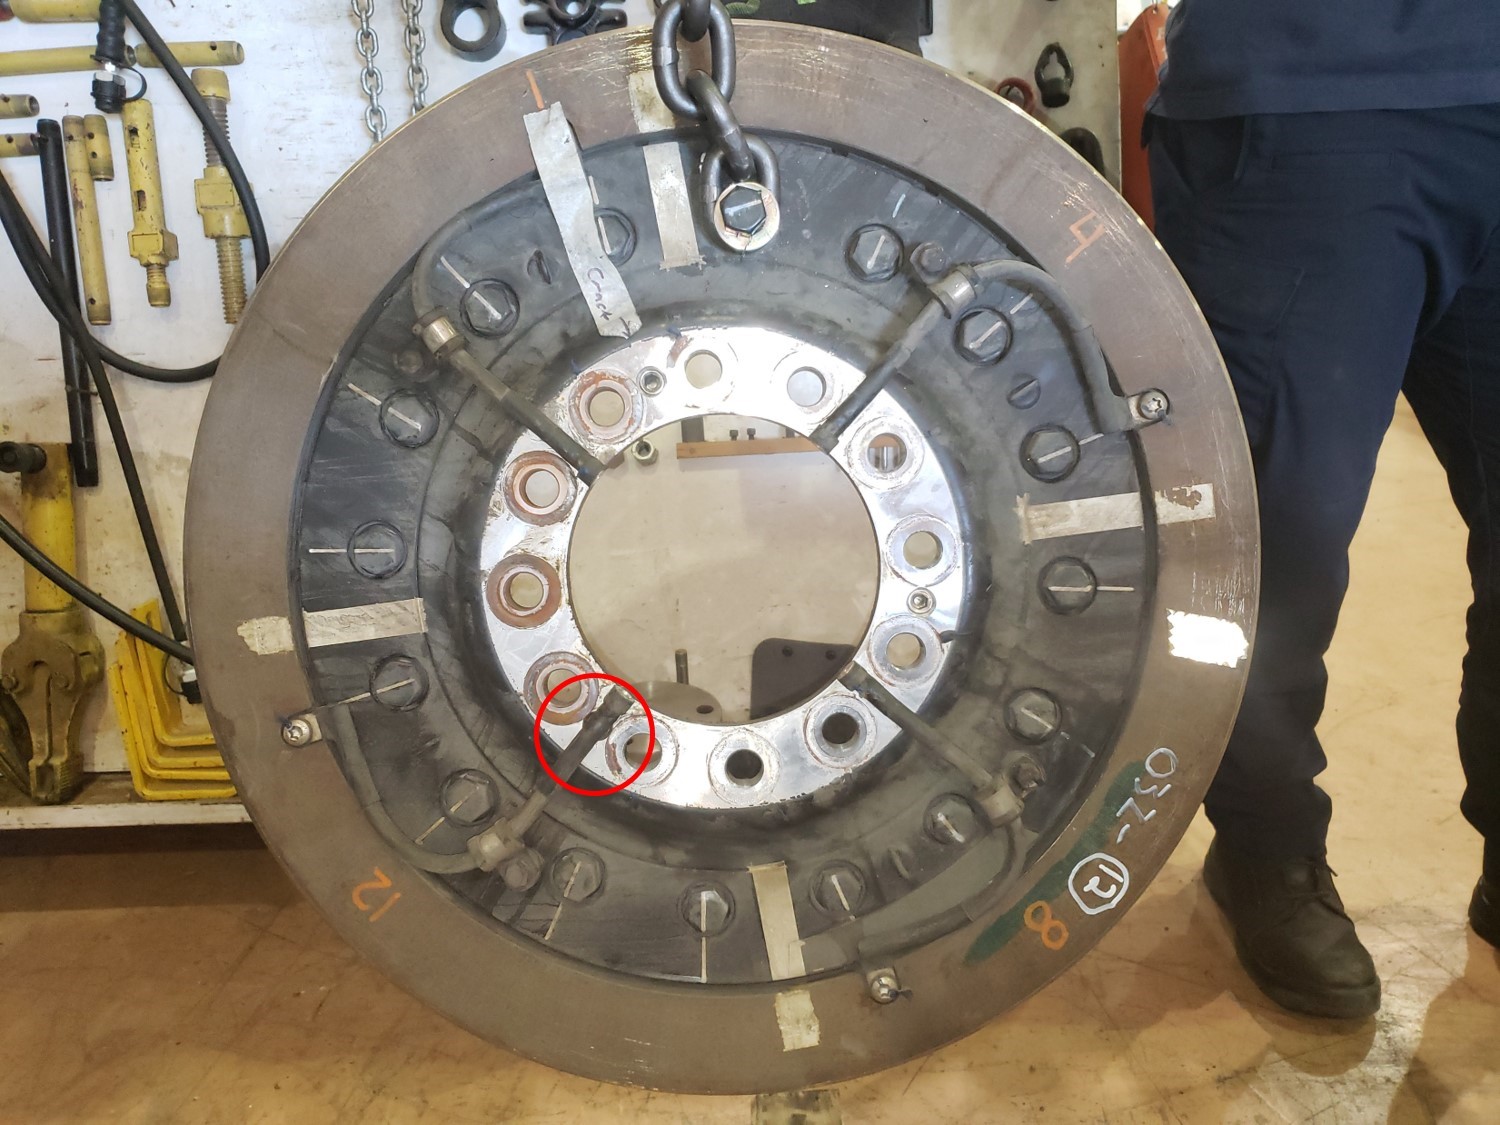 R12 wheel on LRV 1133 with reported wheel hub crack identified (tape and arrow) and 1 jacking screw obscured by a grounding cable (circle) (Source: TSB)